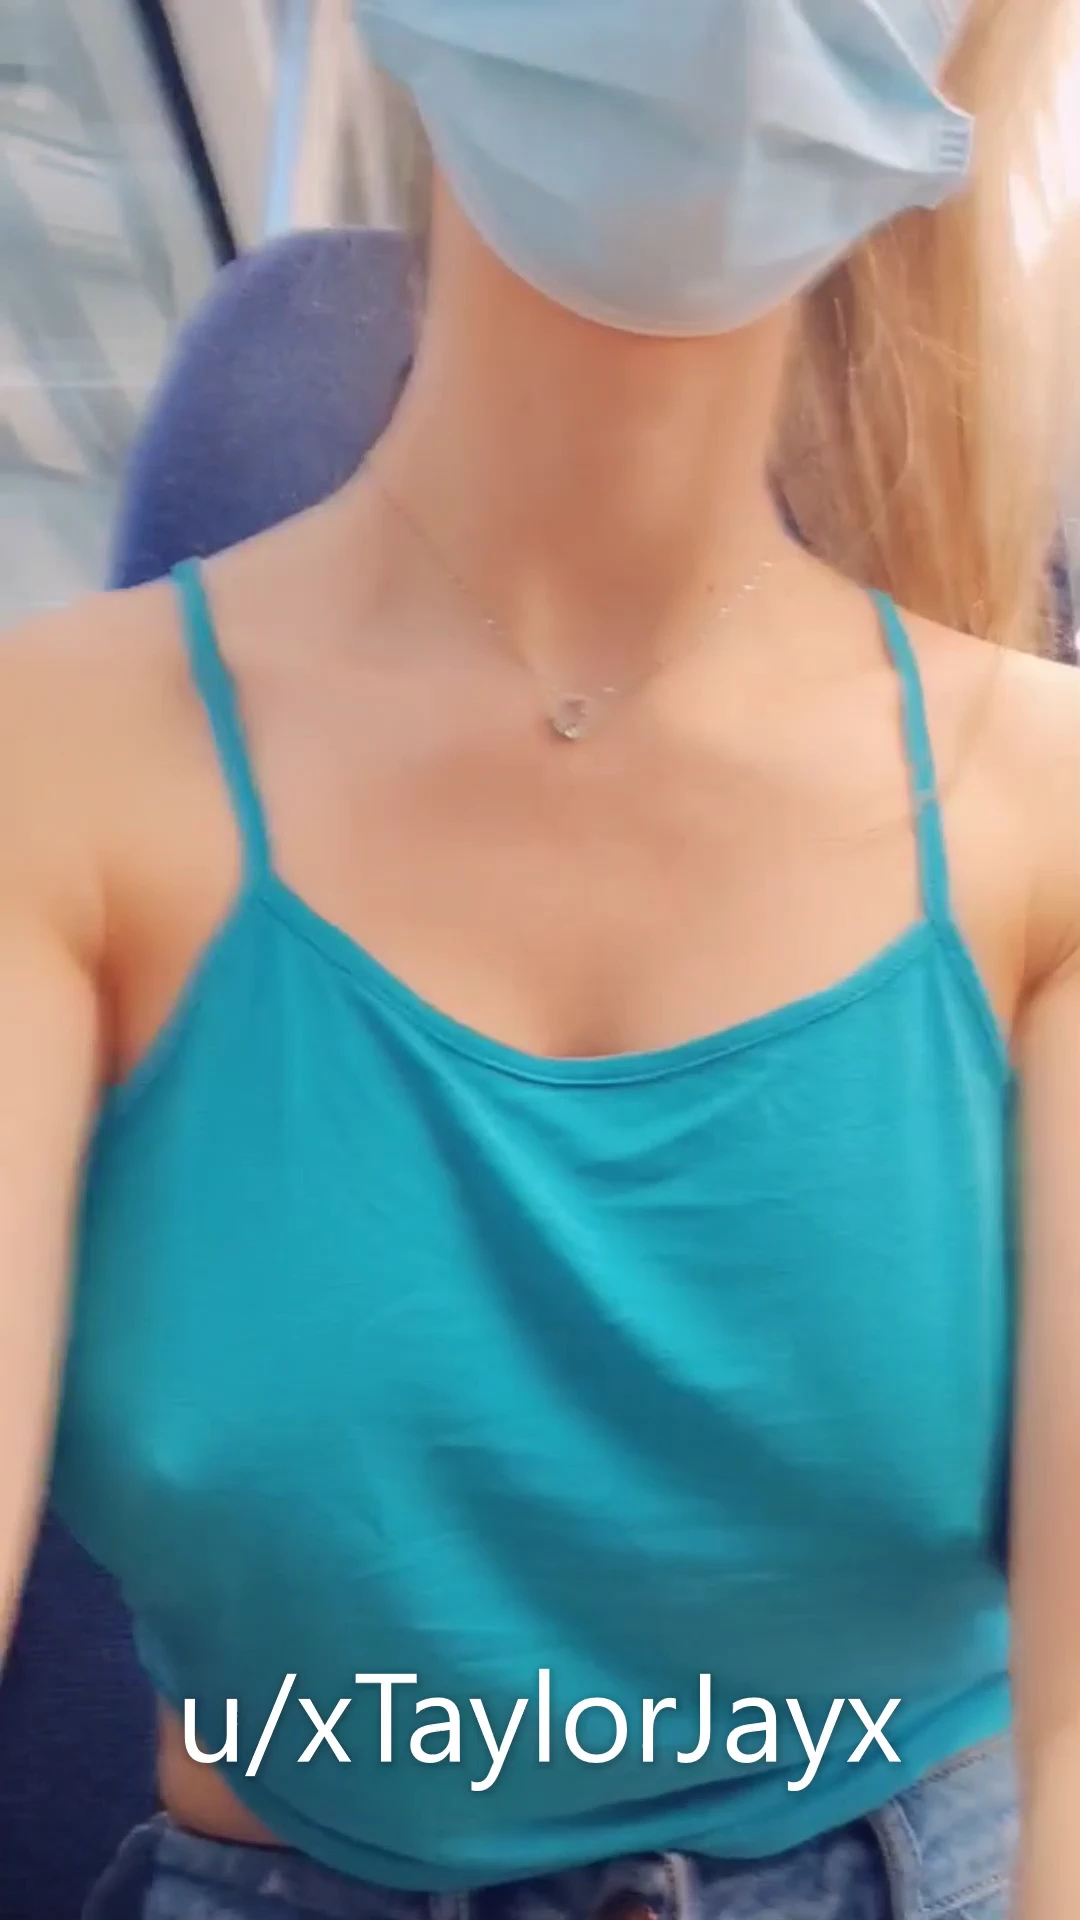 Is it obvious I was super nervous about doing this tiddie reveal on the train?